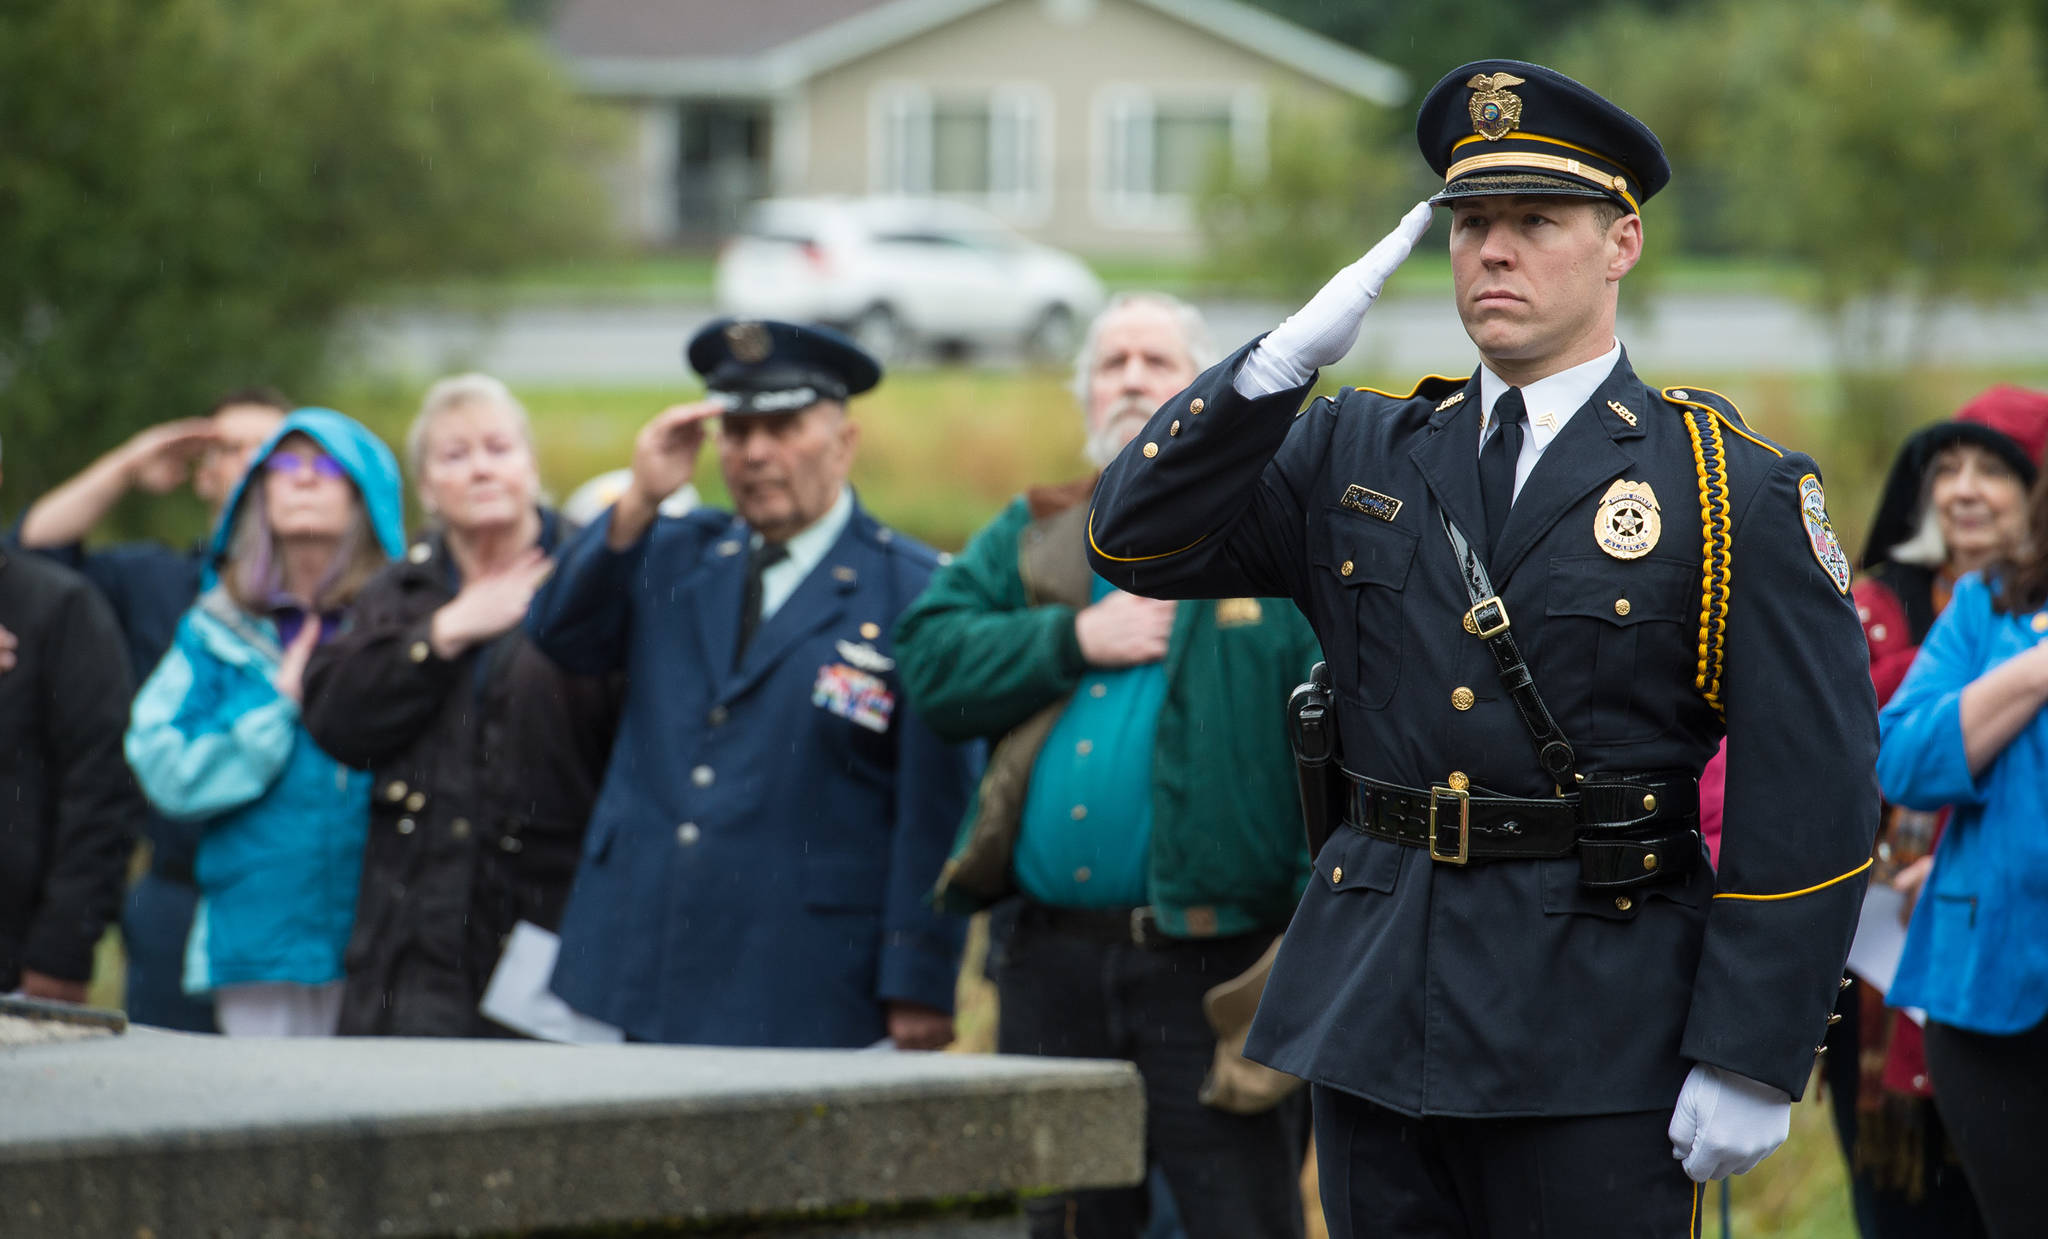 In this file photo from Sept. 11, 2017, Juneau residents and first responders attend a 9/11 Memorial Ceremony at Rotary Park. (Michael Penn | Juneau Empire File)